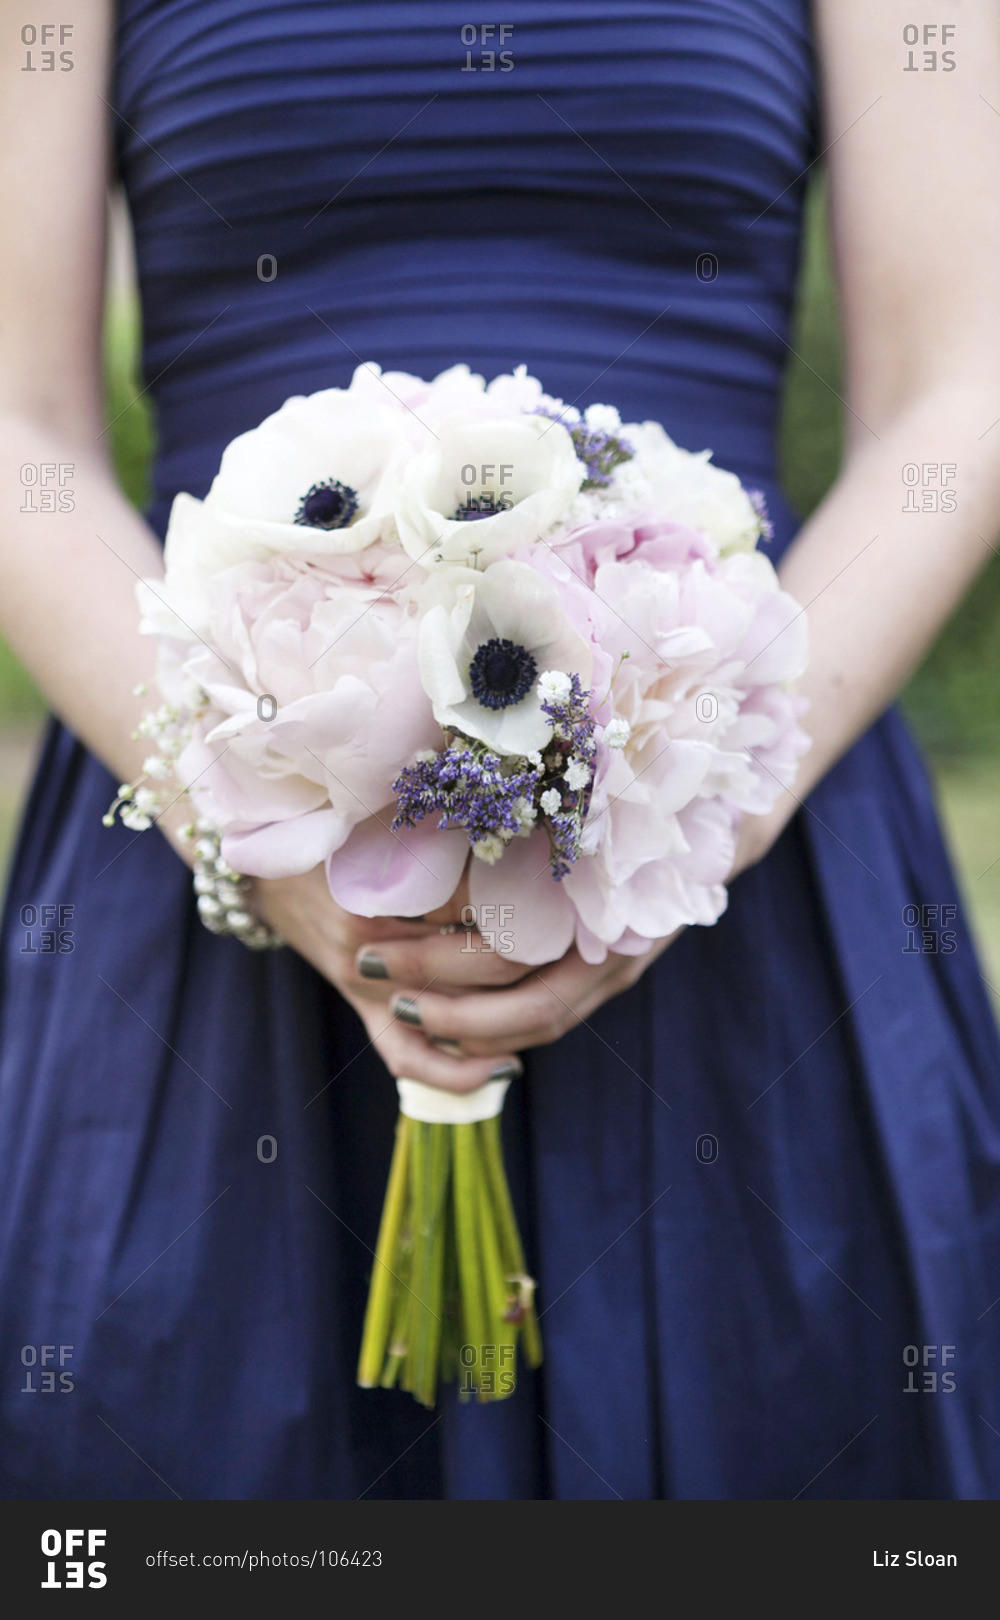 Mid section view of bridesmaid holding a pale pink and white bouquet